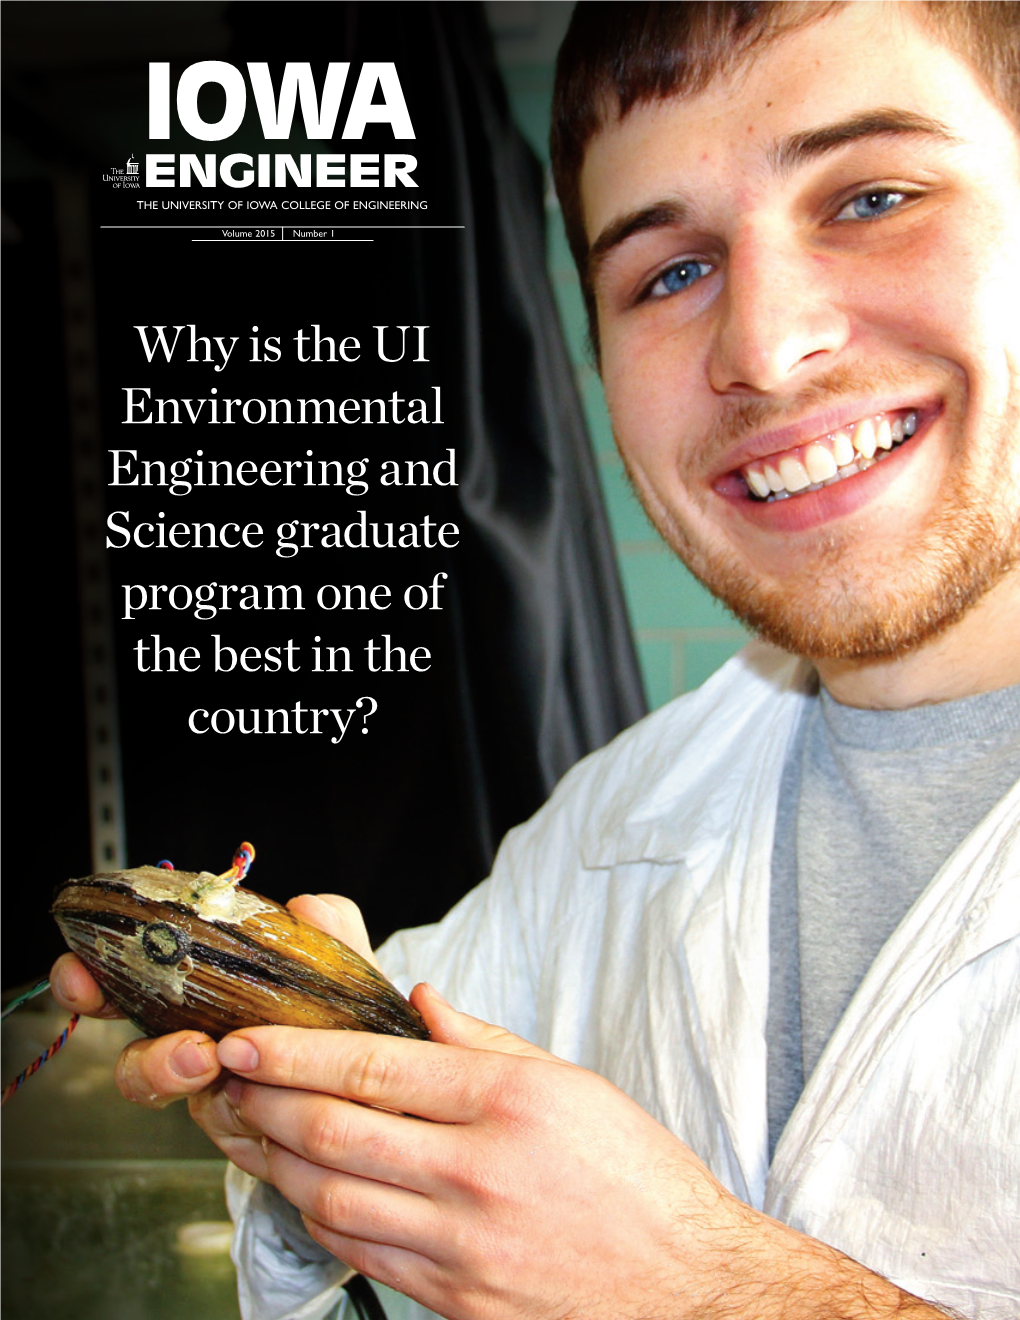 Why Is the UI Environmental Engineering and Science Graduate Program One of the Best in the Country?